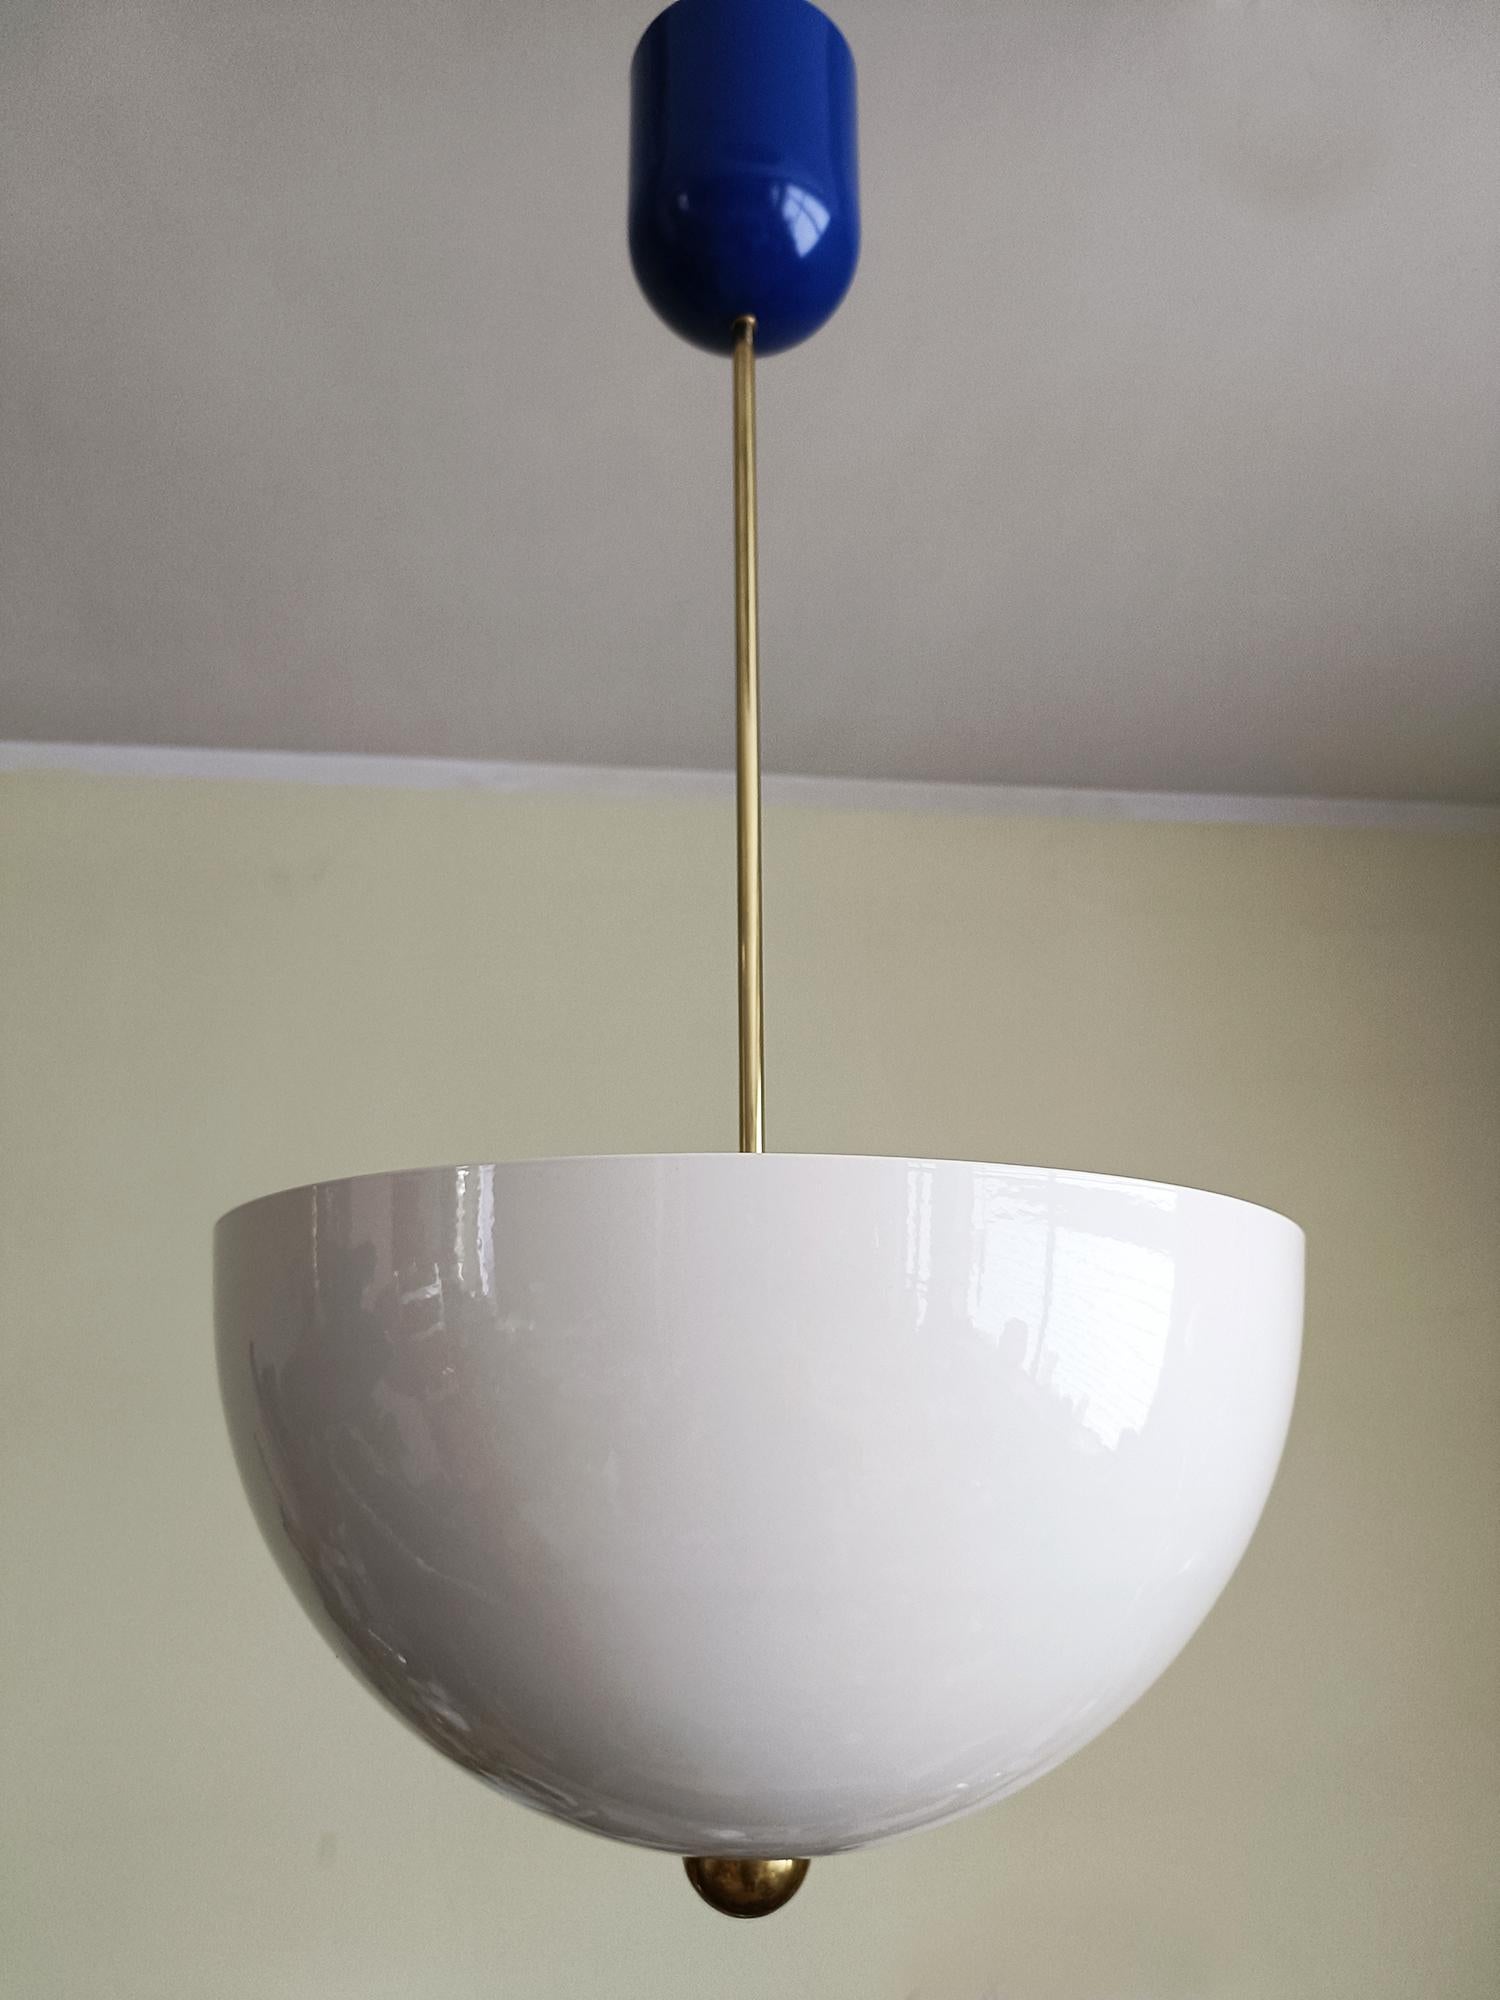 European Lebos - large pendant by Candas Design, White cream/navy blue and brass For Sale